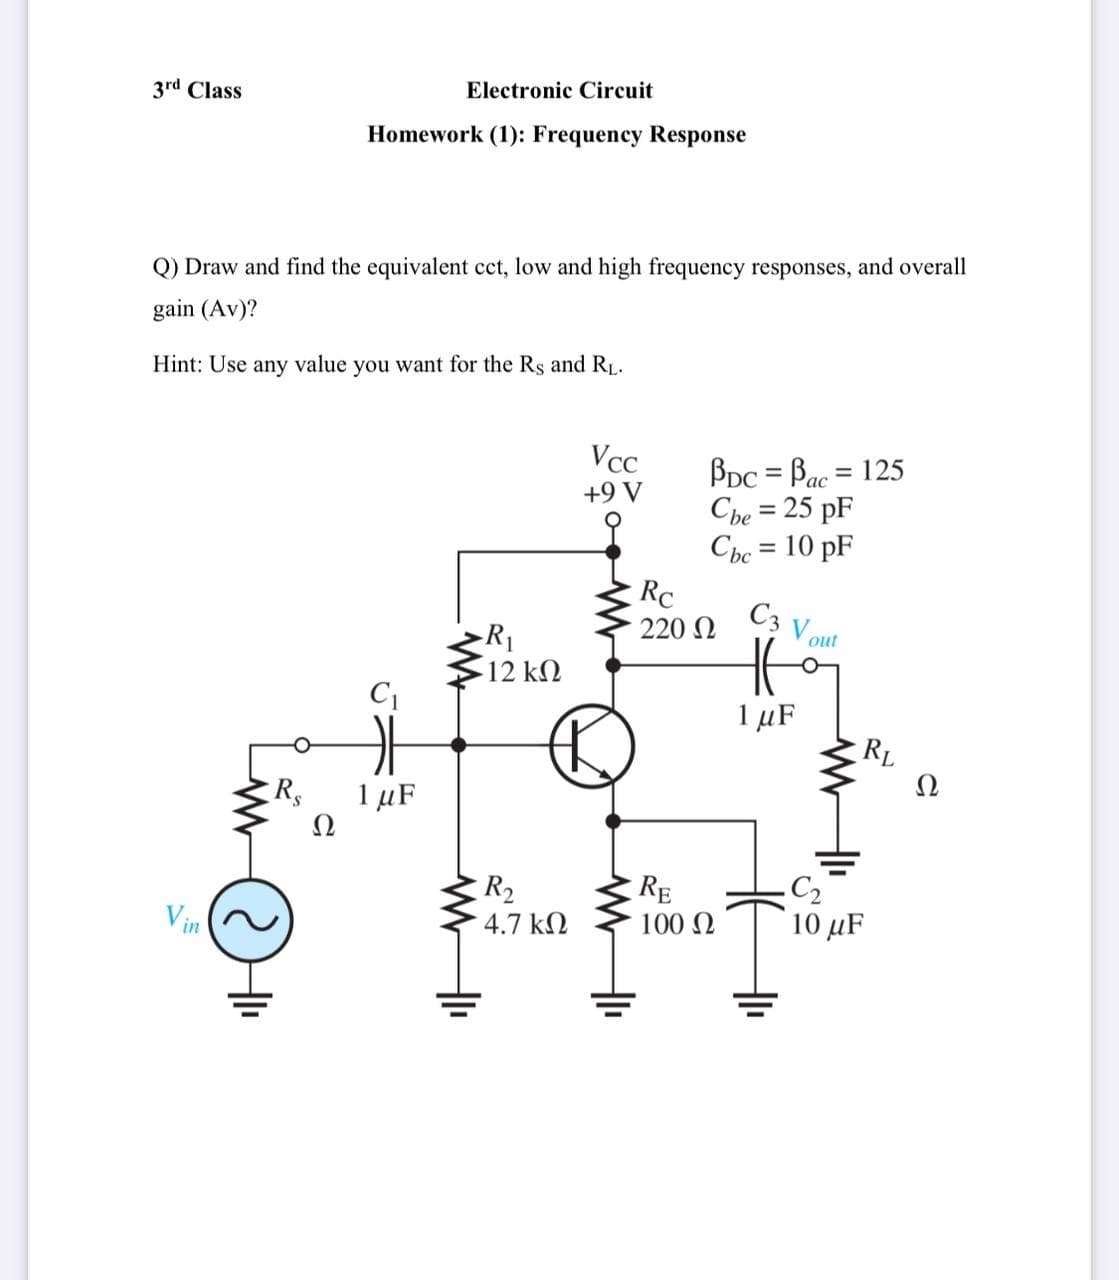 3rd Class
Electronic Circuit
Homework (1): Frequency Response
Q) Draw and find the equivalent cct, low and high frequency responses, and overall
gain (Av)?
Hint: Use any value you want for the Rs and RL.
Vcc
BDc = Bac = 125
Cbe = 25 pF
Cbc = 10 pF
ас
A 6+
%3D
%3D
RC
C3
220 N
Vout
R1
12 k2
1 µF
RL
Ω
R
1 µF
Ω
C2
10 μF
RE
R2
4.7 kN
Vin
100 N
